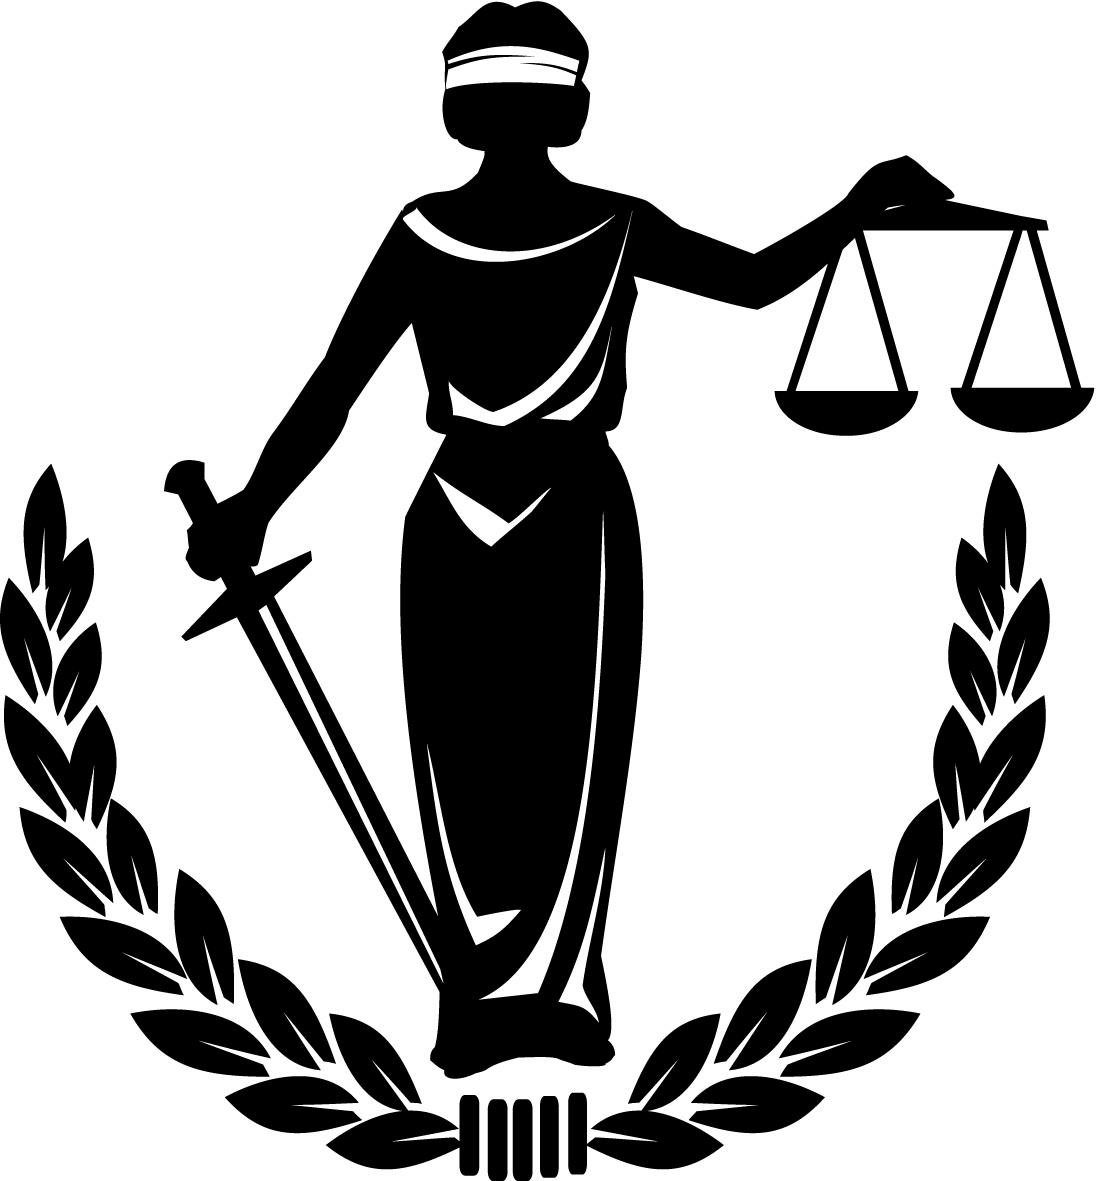 Justice google search blonde. Evidence clipart lady detective